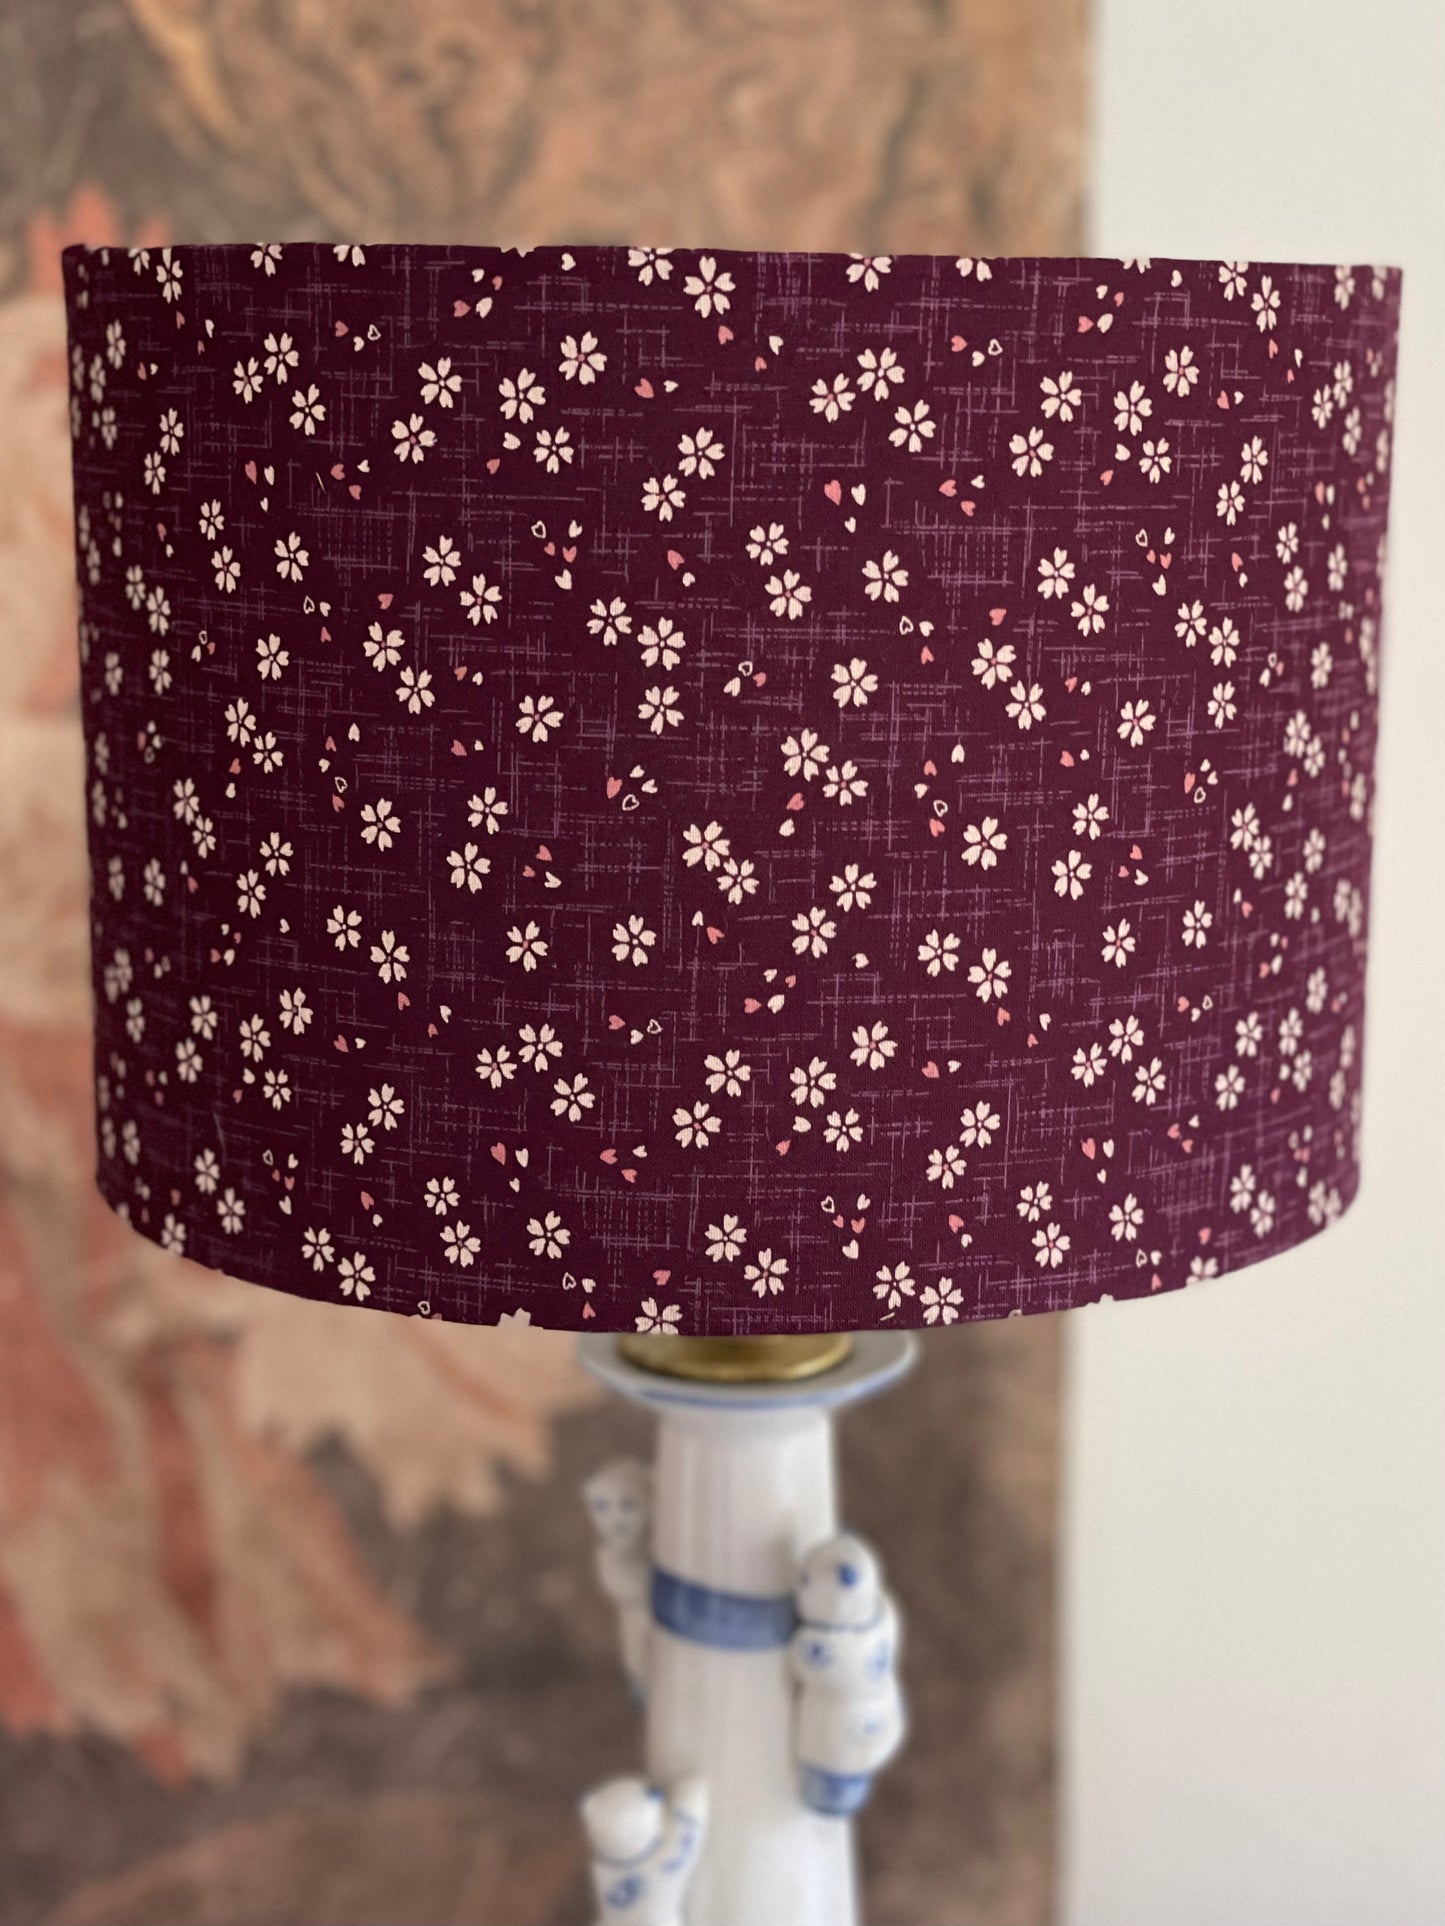 10 inch Drum Lampshade. Deep Plum with Tiny Cherry Blossom Motif. Japanese Cotton Fabric.